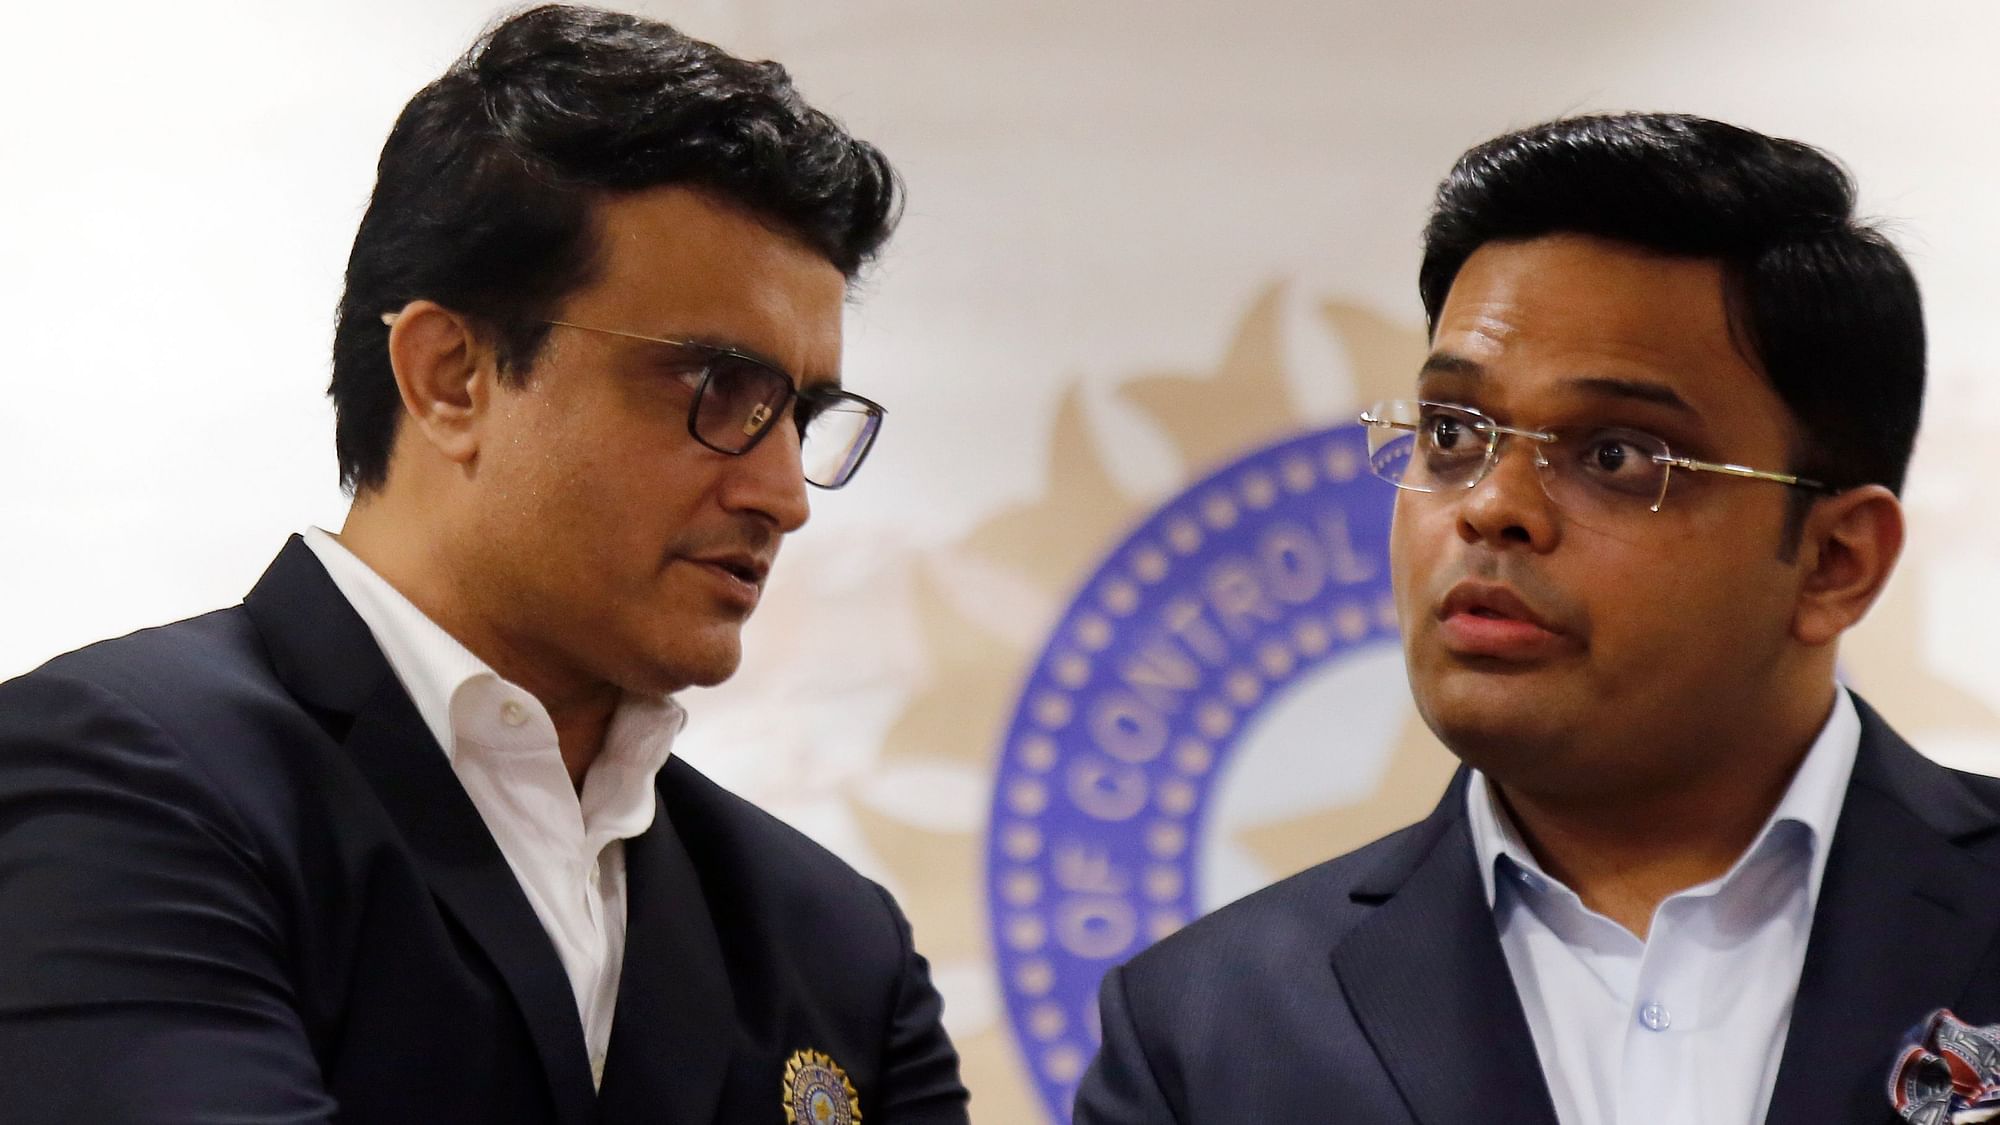 BCCI President Ganguly and Secretary Jay Shah will be able to extend their tenures at the board if the Supreme Court decides to approve the proposal.